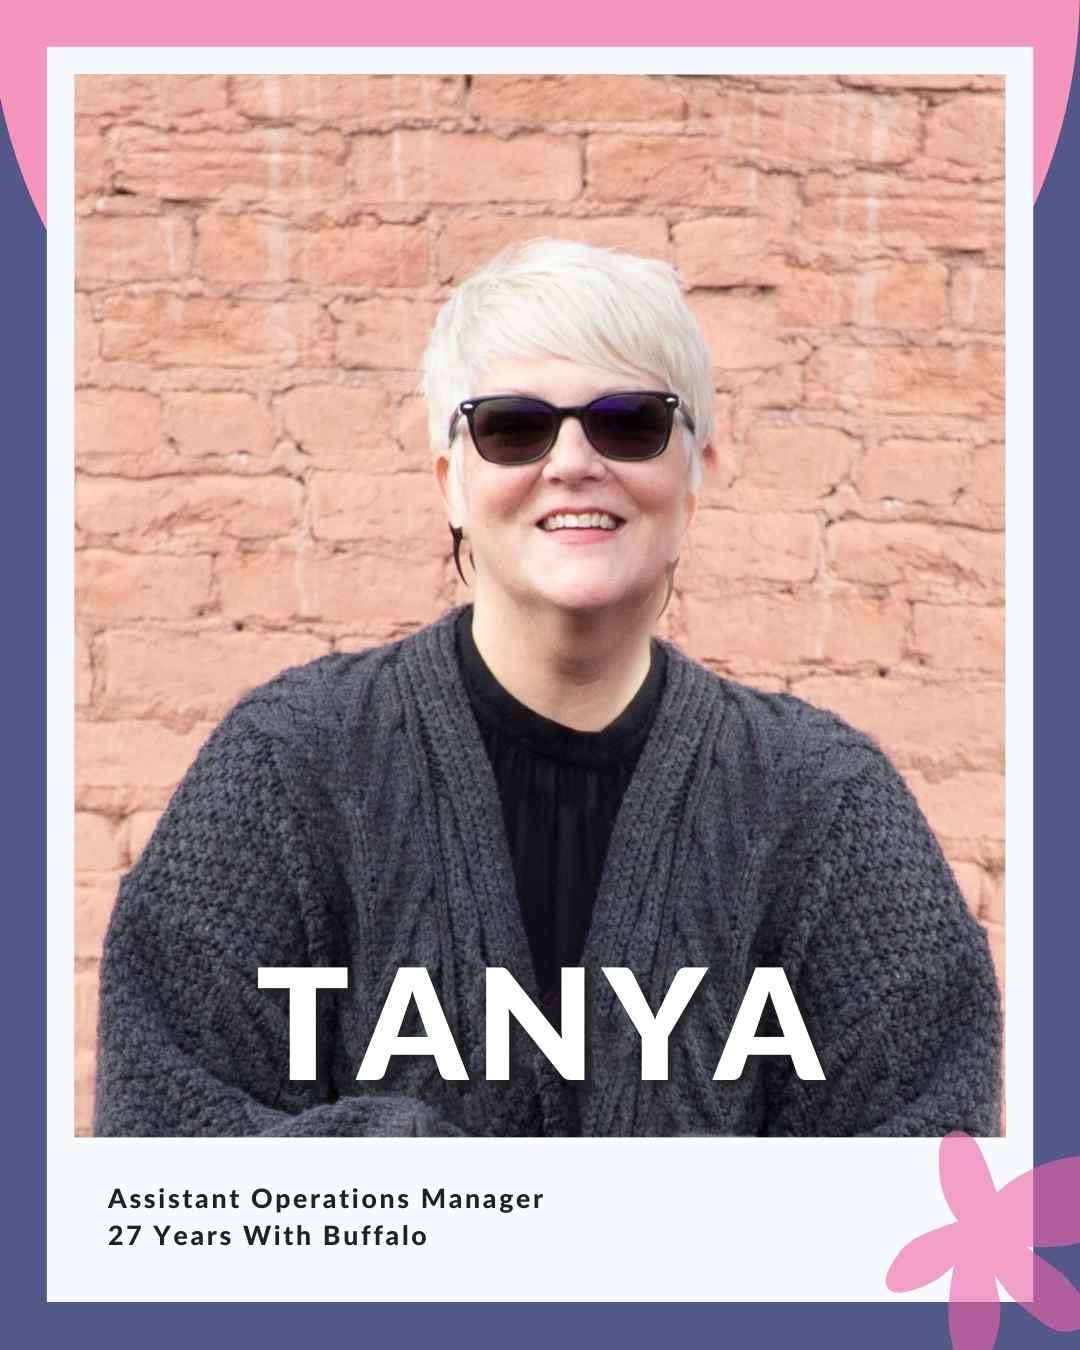 Tanya wearing a grey cardigan and sunglasses; reads Assistant Operations Manager - 27 Years With Buffalo Exchange